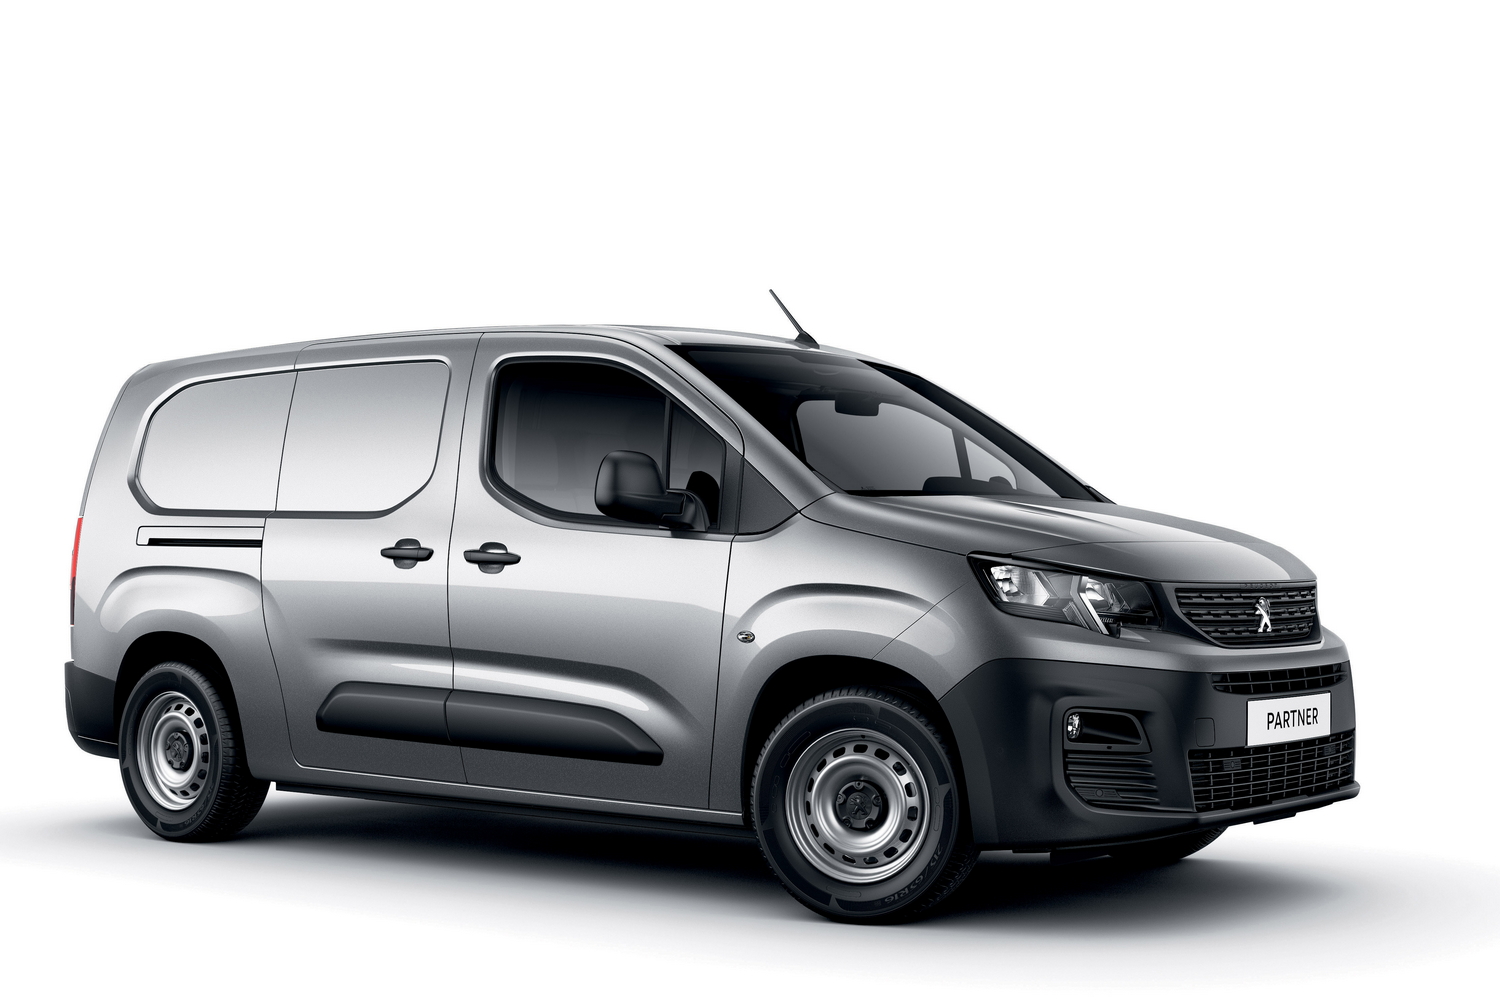 Van Reviews | How much to tax a 1.6 Peugeot Partner privately? | CompleteVan.ie